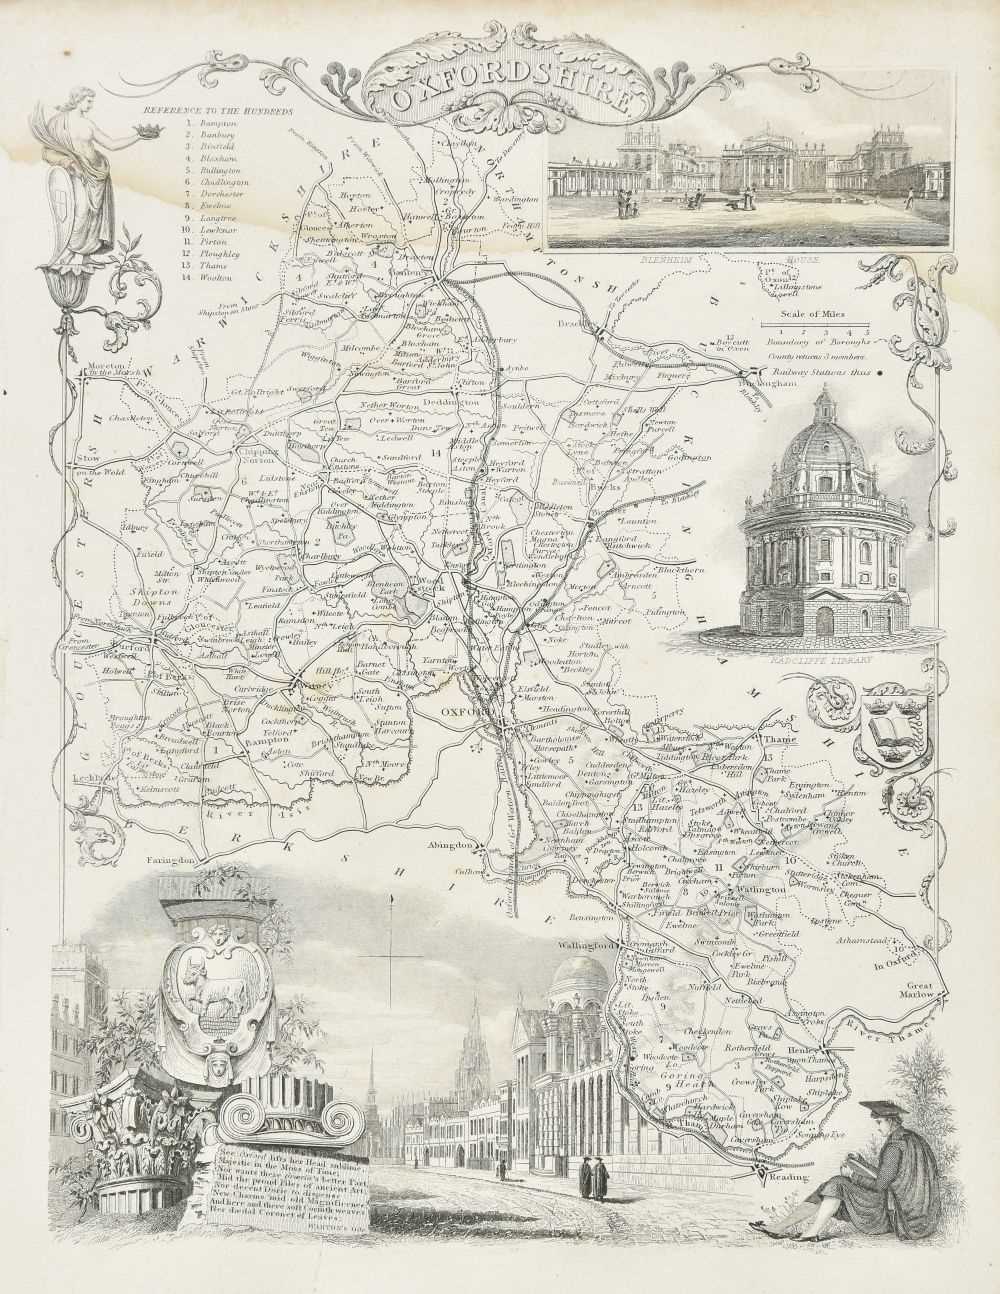 Lot 80 - Maps. A mixed collection of approximately 400 maps, mostly 19th century